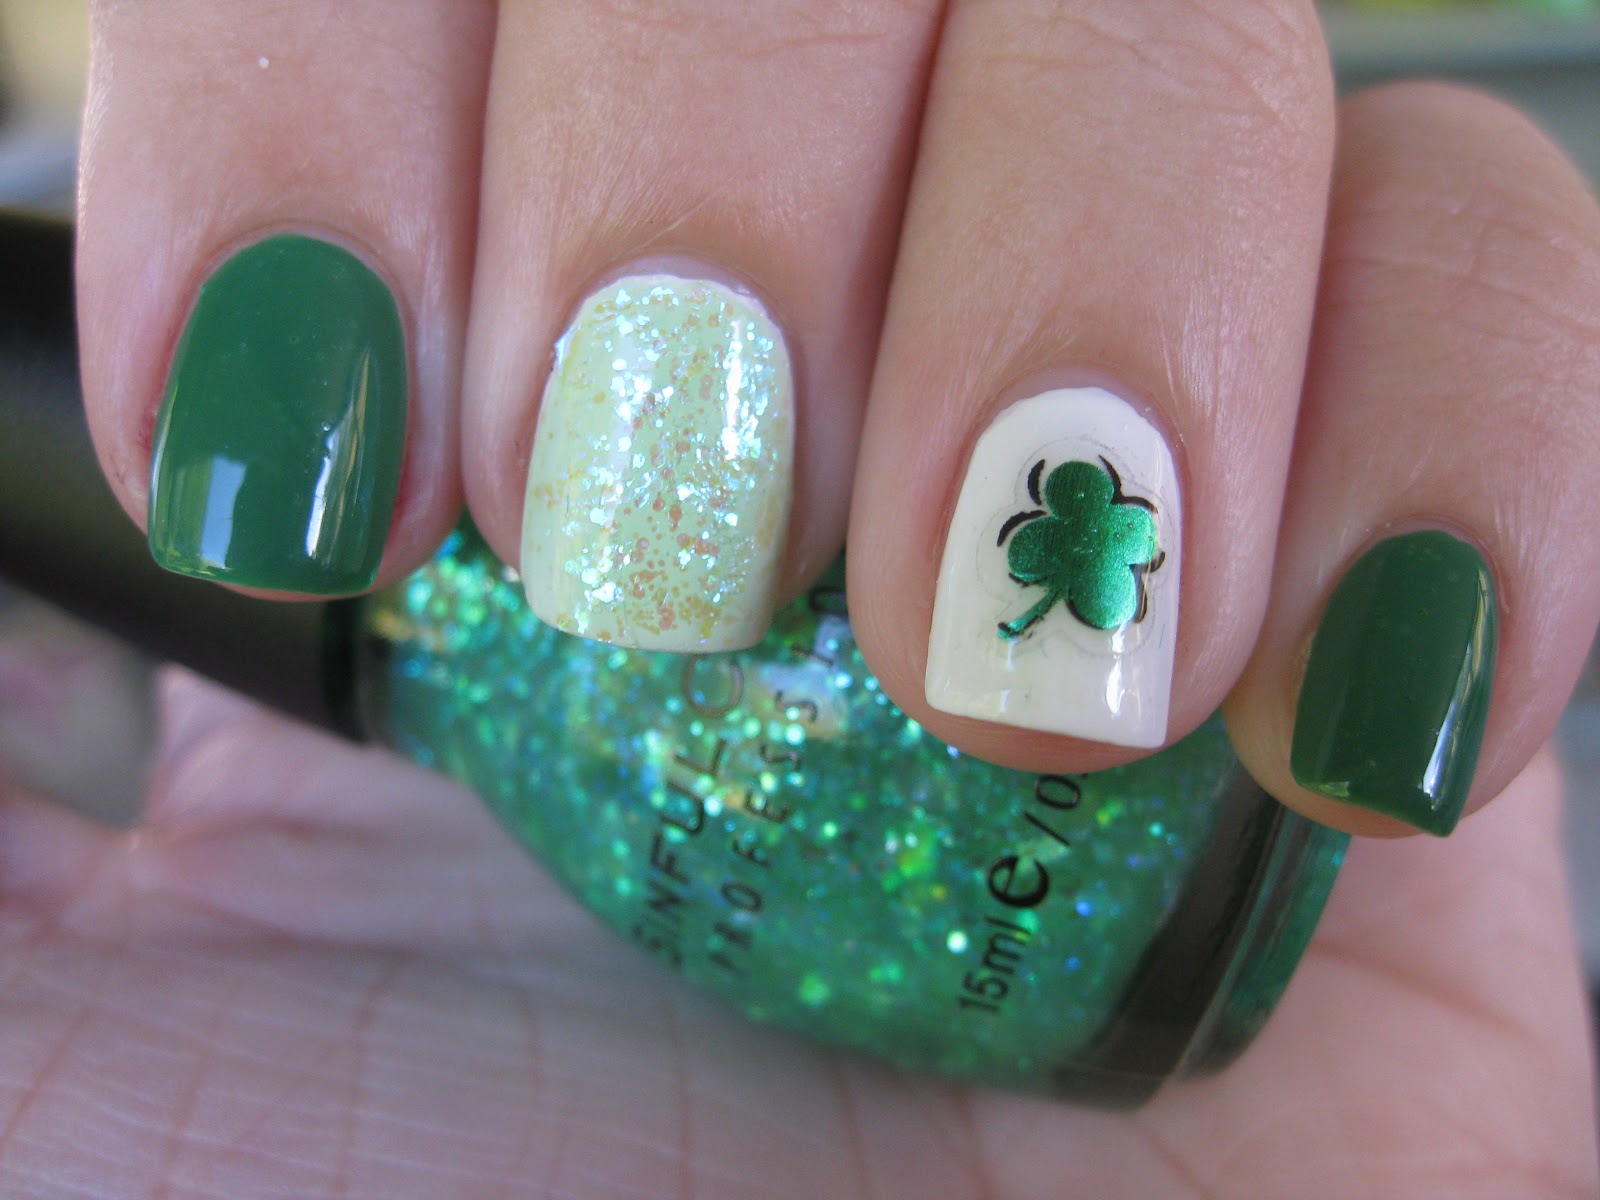 6. "Rainbow and Pot of Gold Gel Nail Design for St. Patrick's Day" - wide 6